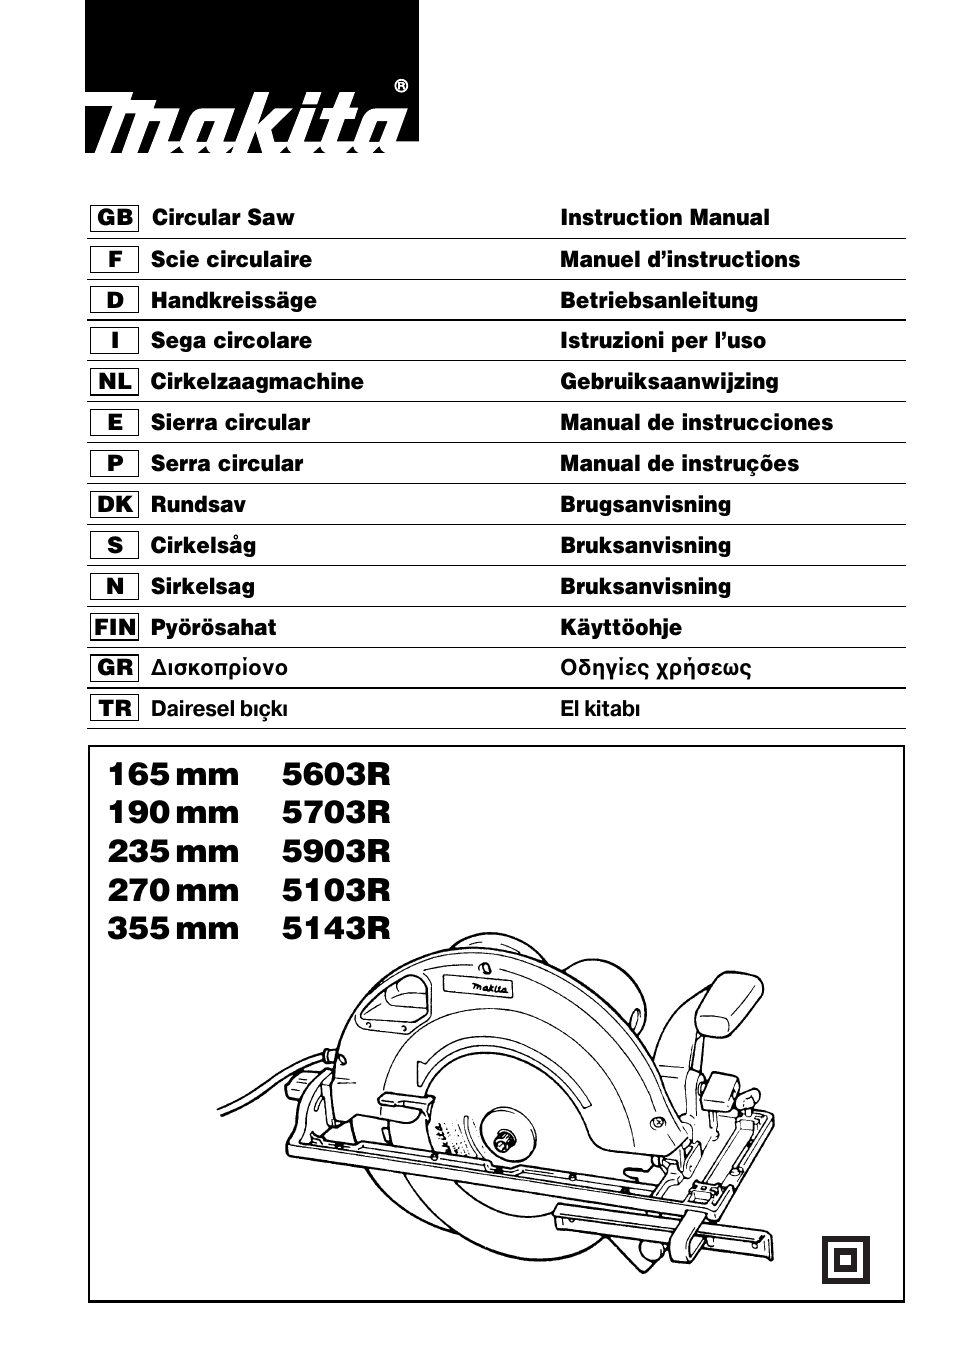 Makita 5603R User Manual | 27 pages | Also for: 5703R, 5903R, 5103R, 5143R